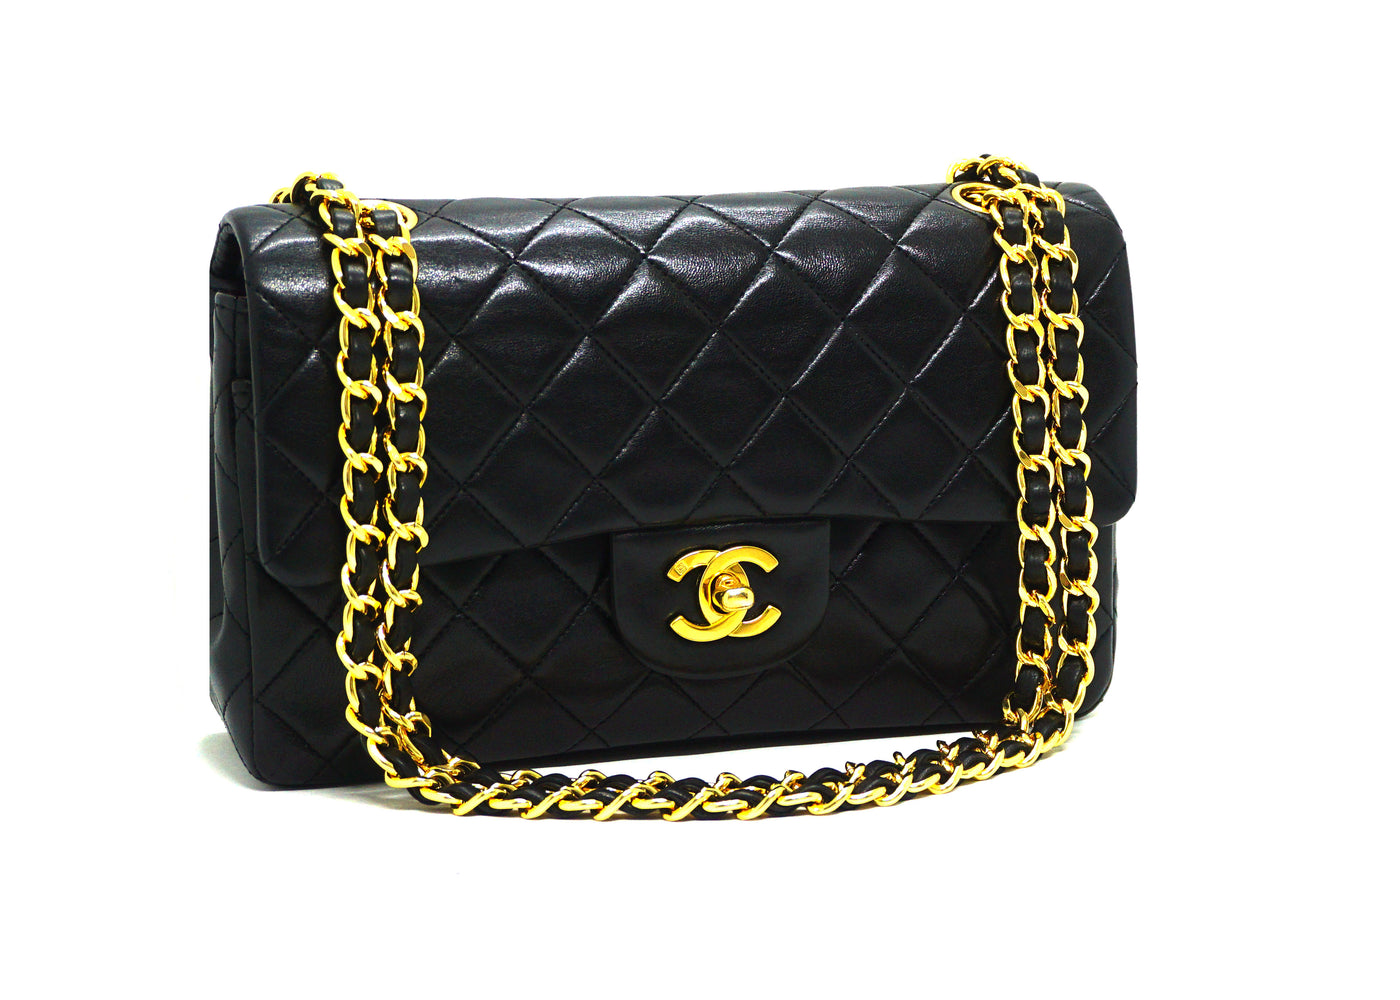 Chanel Vintage Black Lambskin Small Classic Double Flap